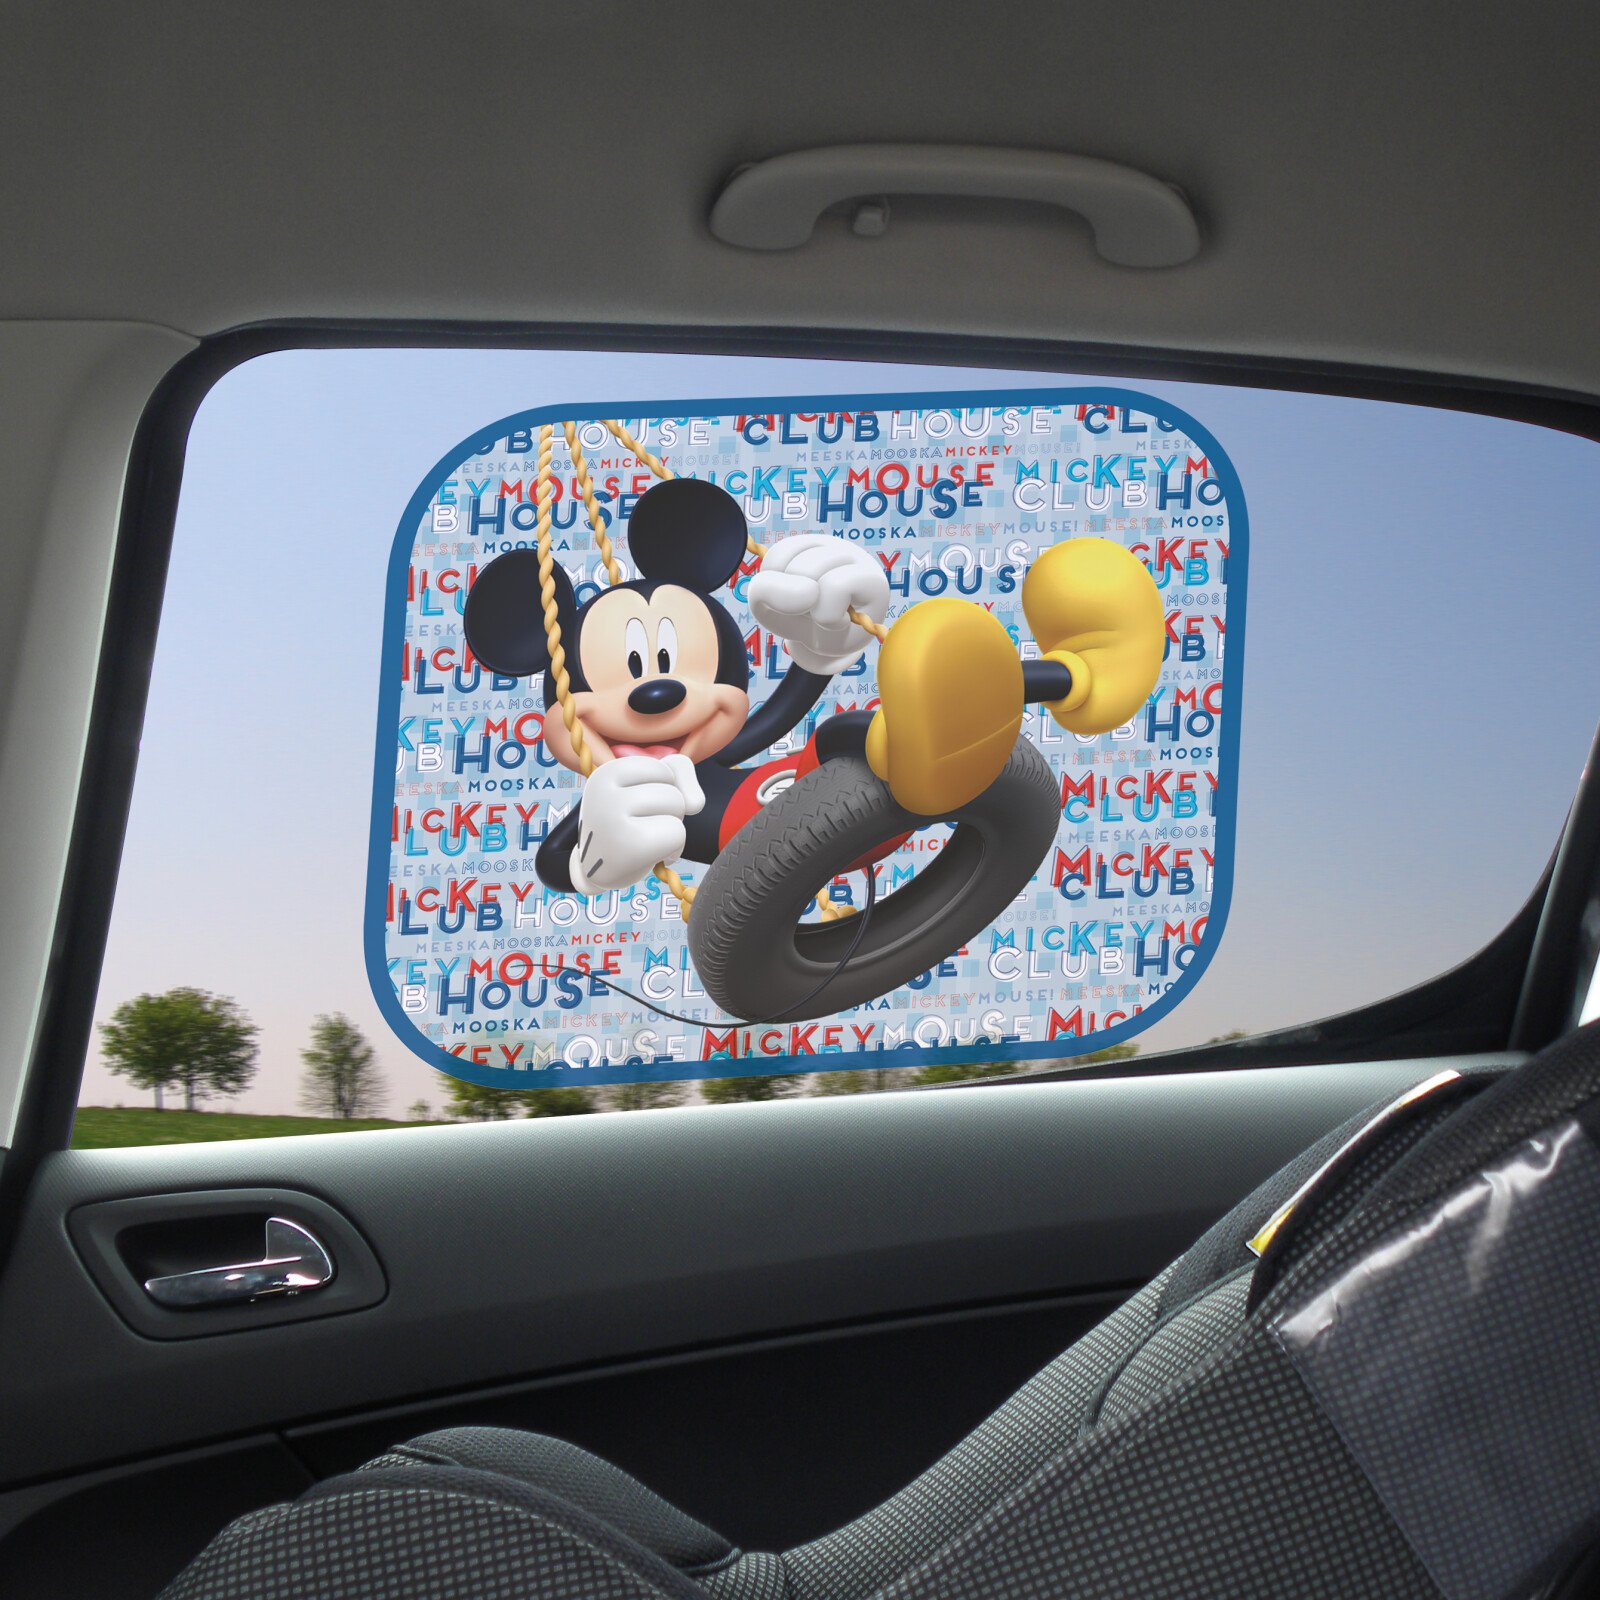 Disney side sunshades with suction cups 2pcs - Mickey 2 thumb